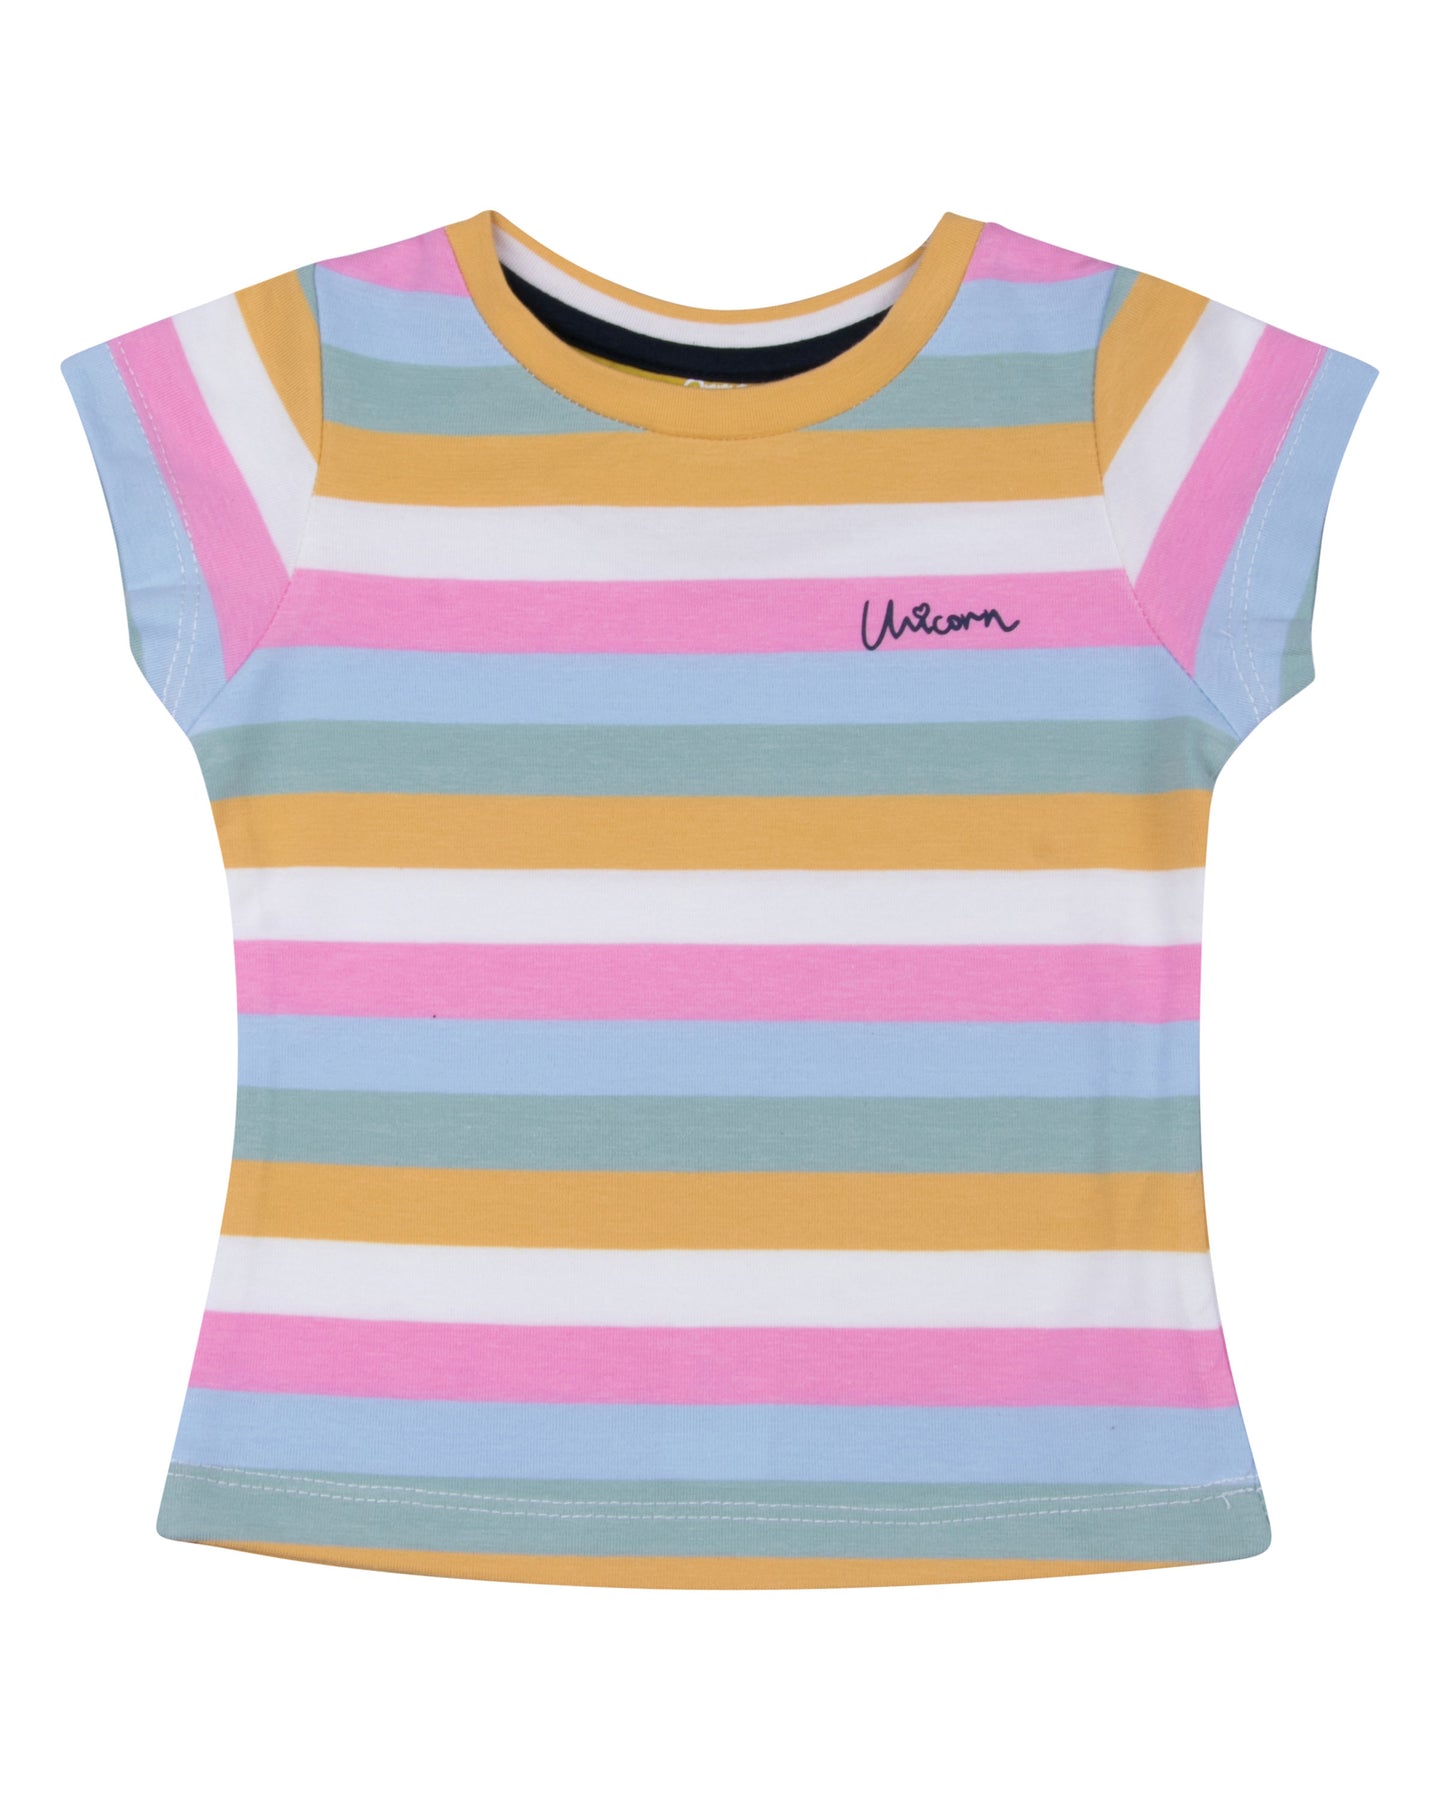 Girls Casual Striped Top